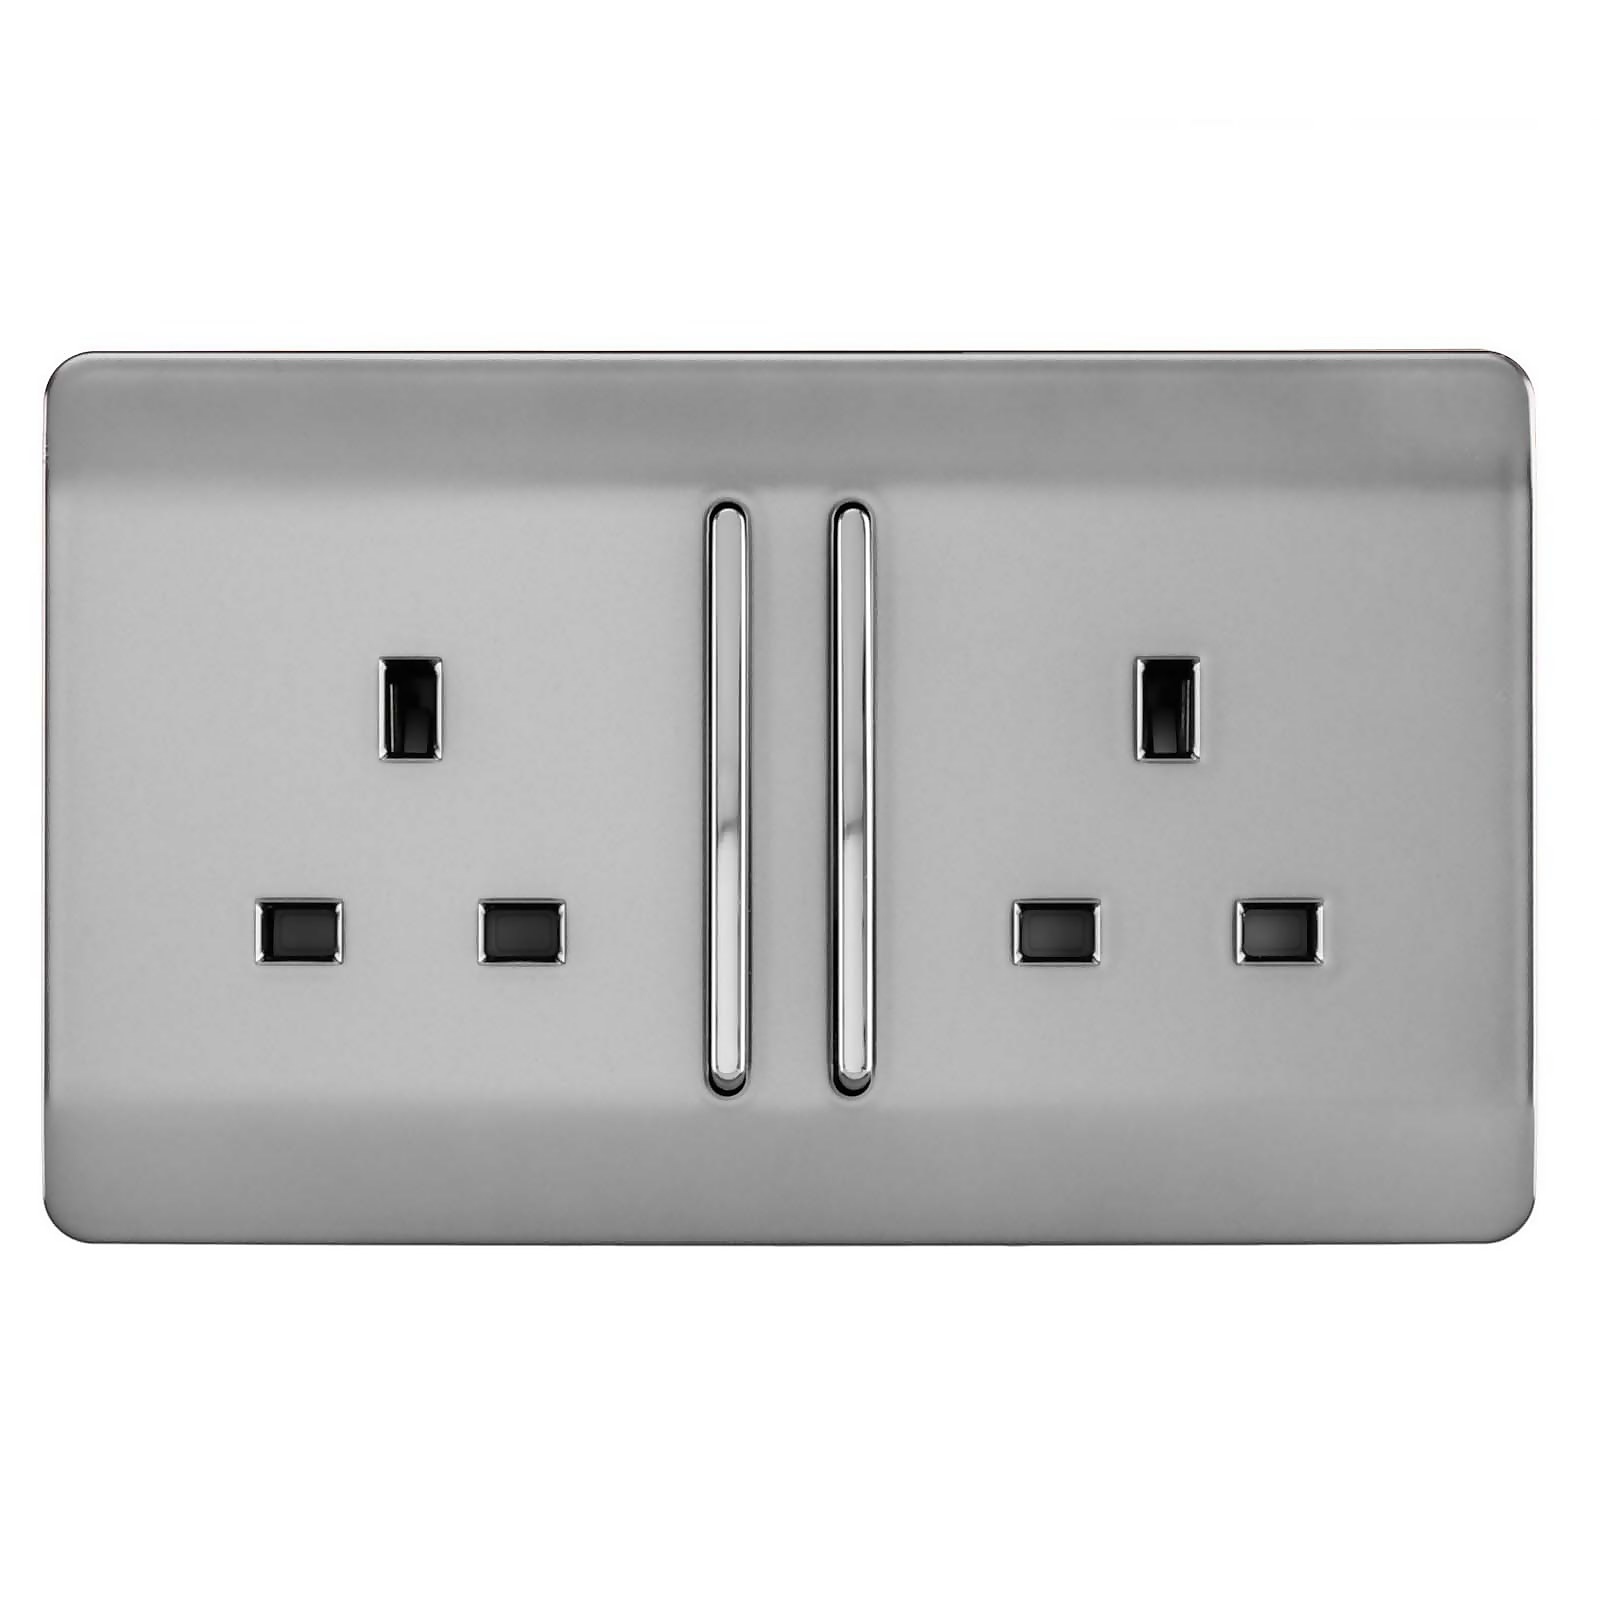 Photo of Trendi Switch Double Switched Socket - Stainless Steel